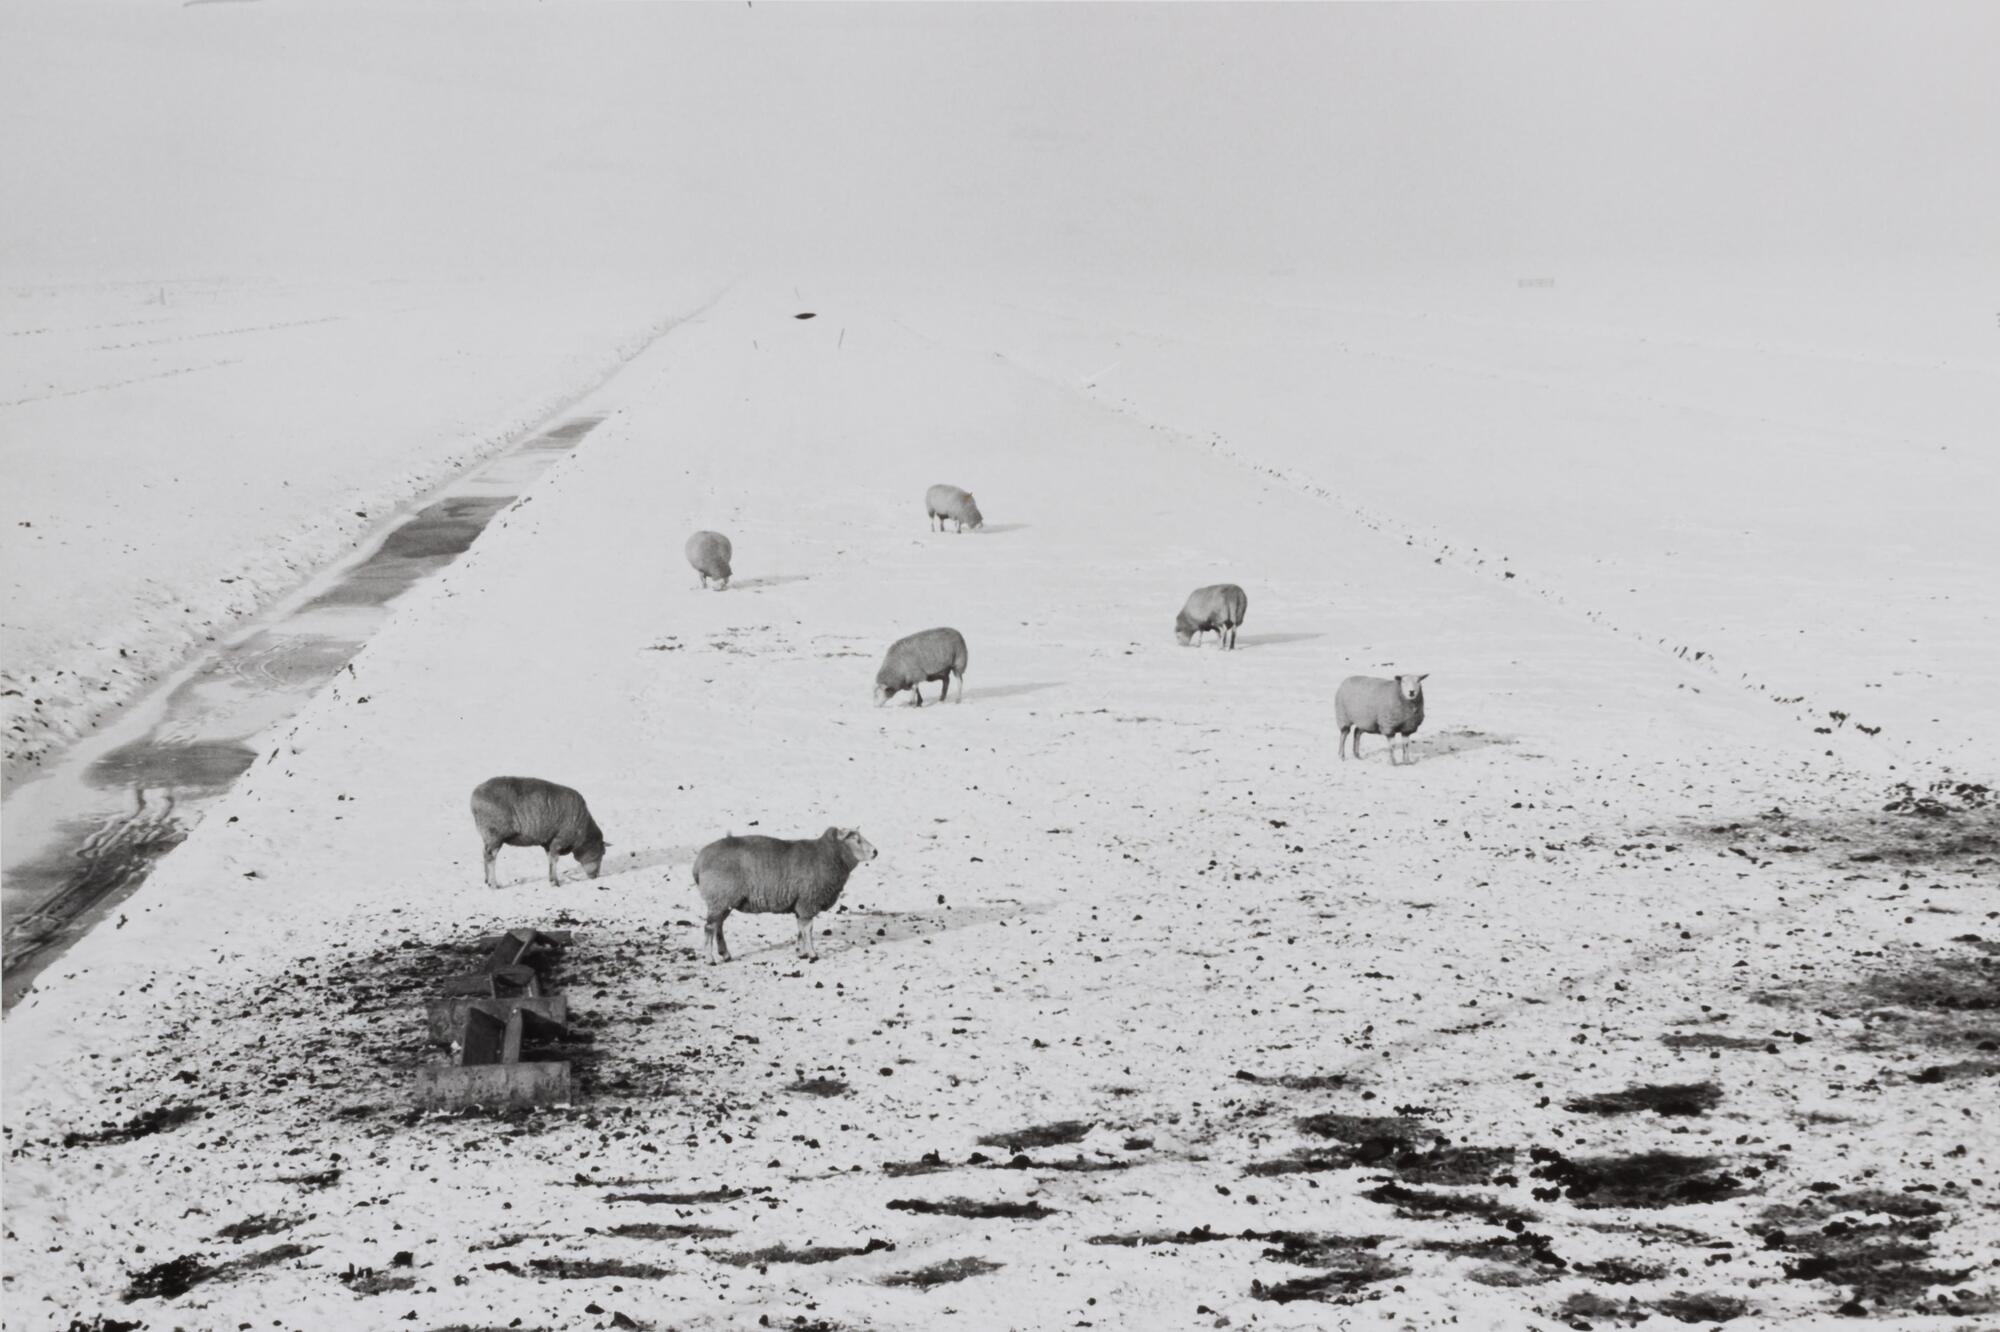 Sheep in the middle of a field covered in snow. The sky above is all white.